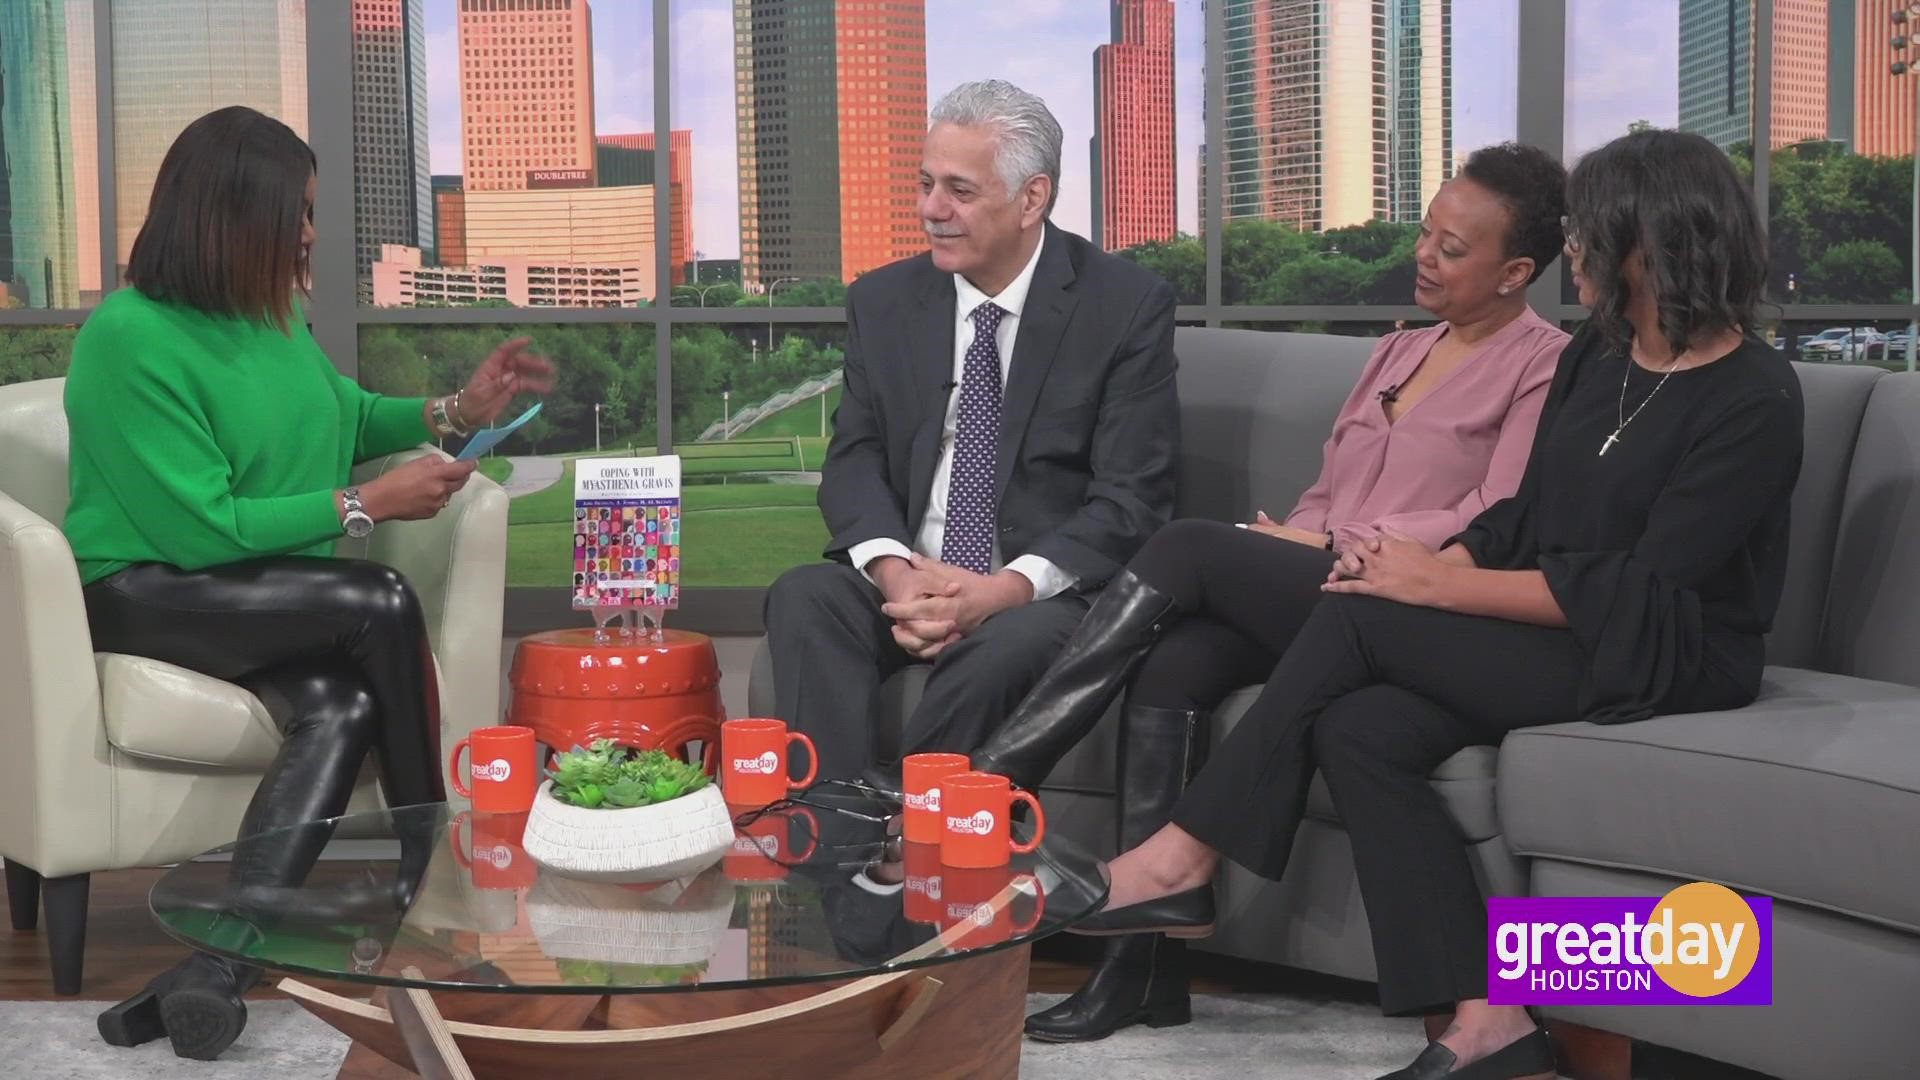 Dr. Aziz Shaibani joins Great Day Houston to give insight on two rare diseases, Stiff Person Syndrome and Myasthenia Gravis.